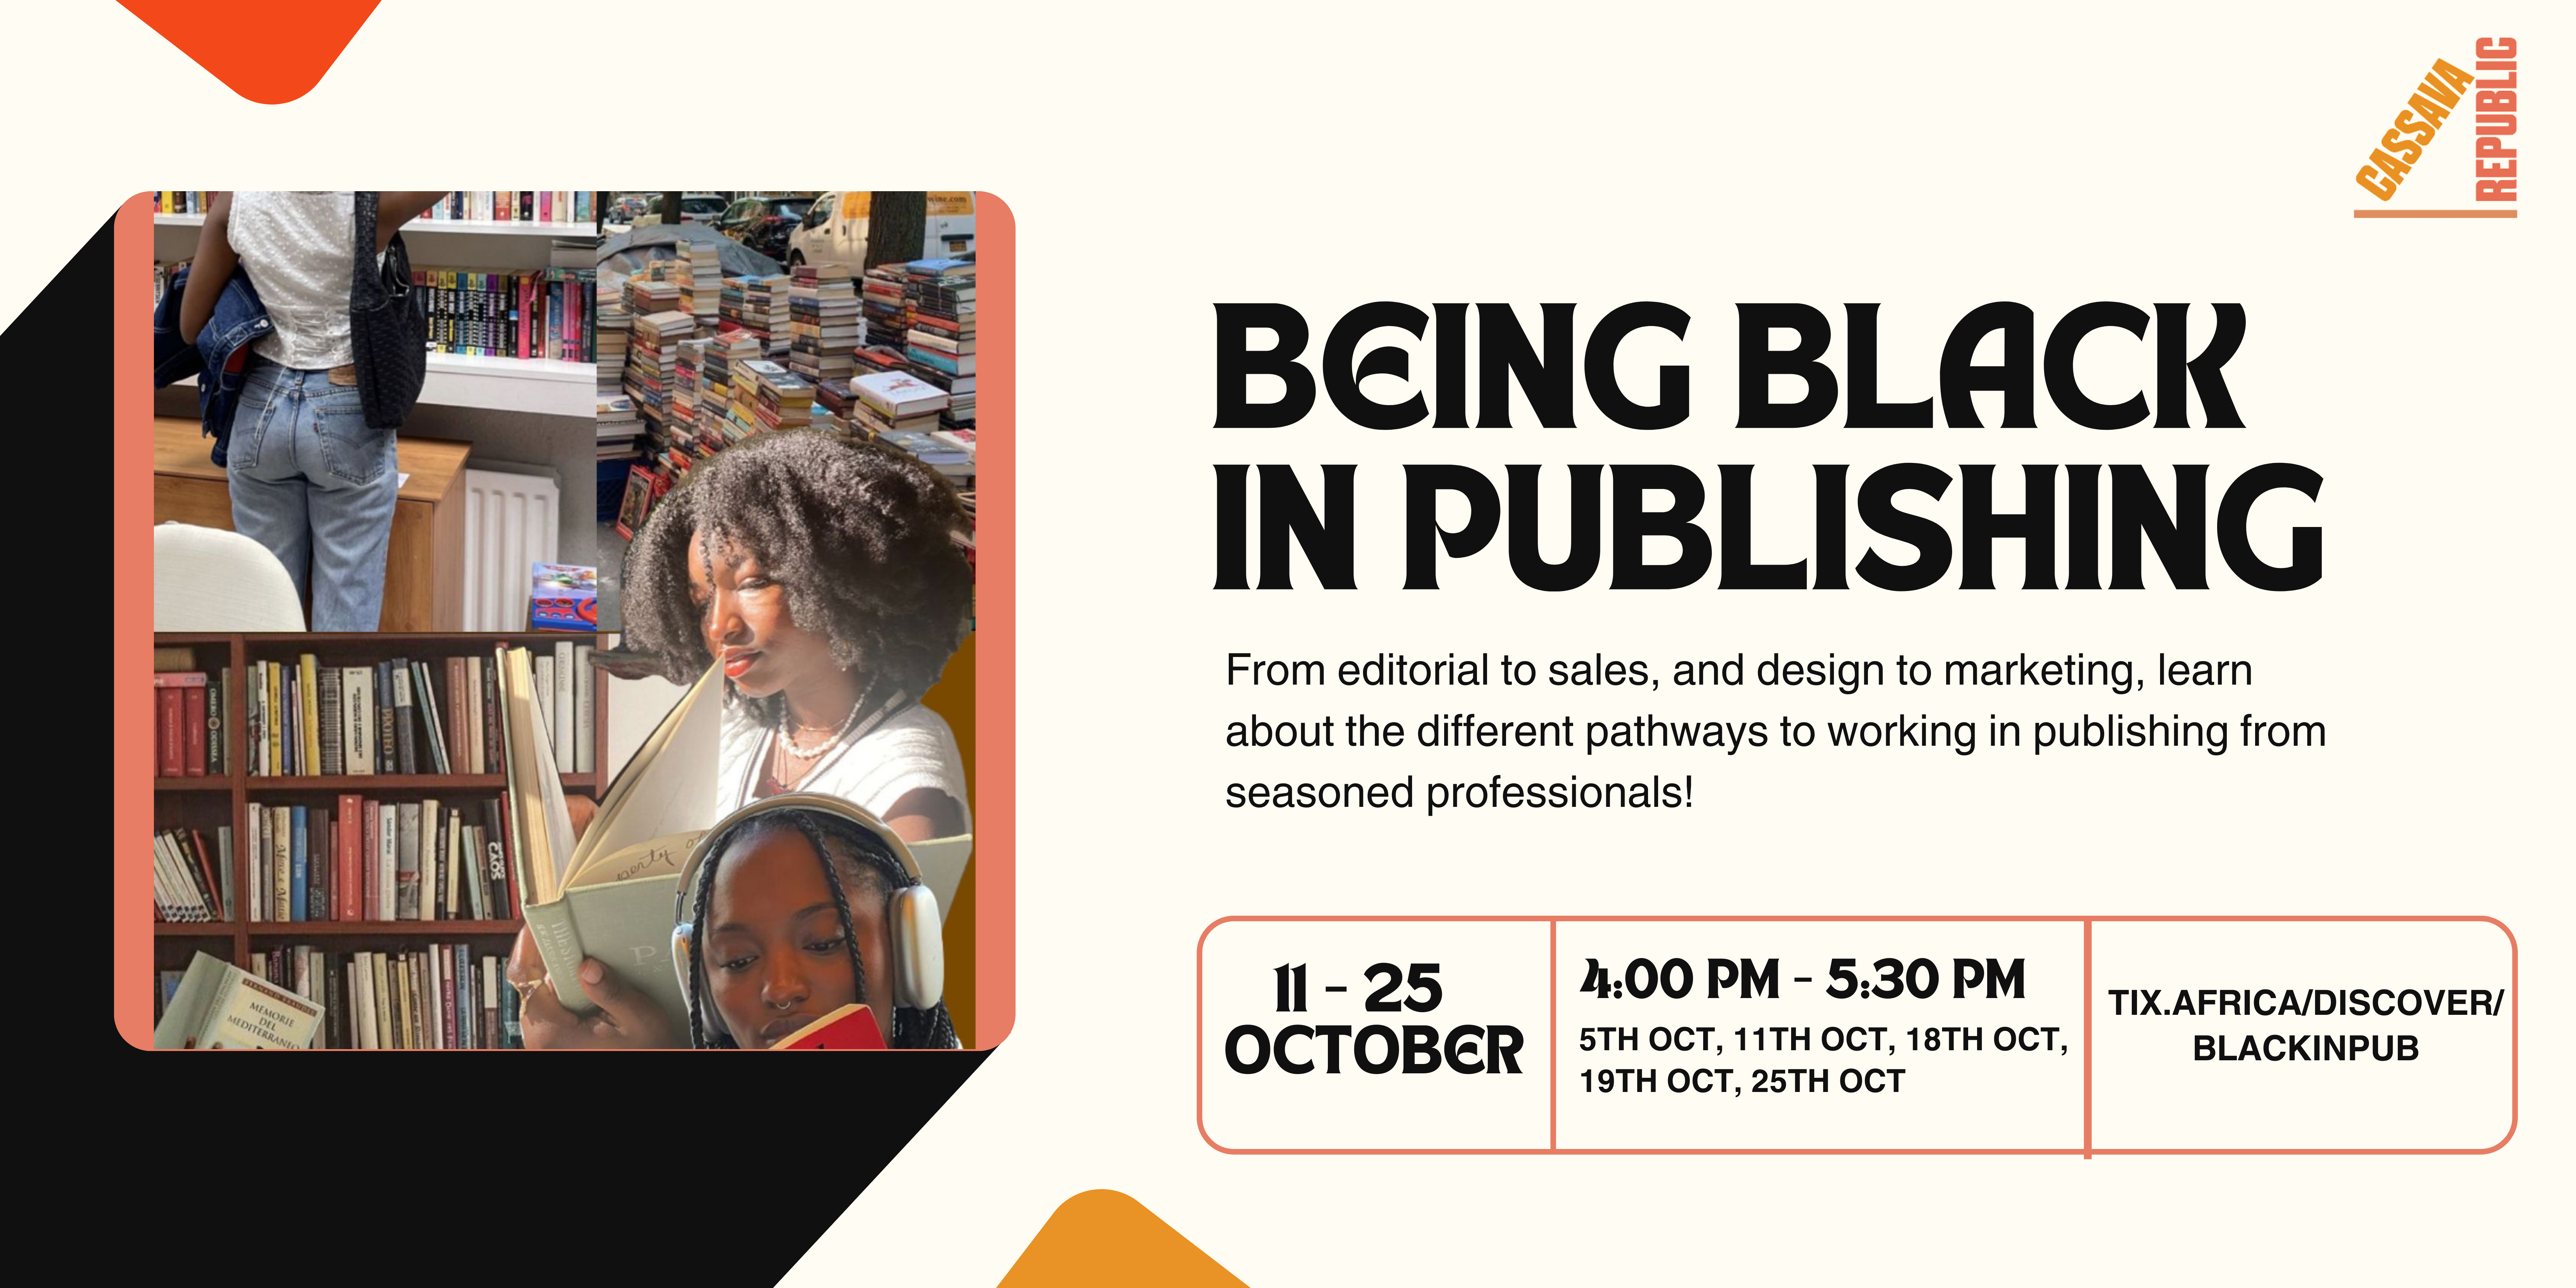 Being Black in Publishing